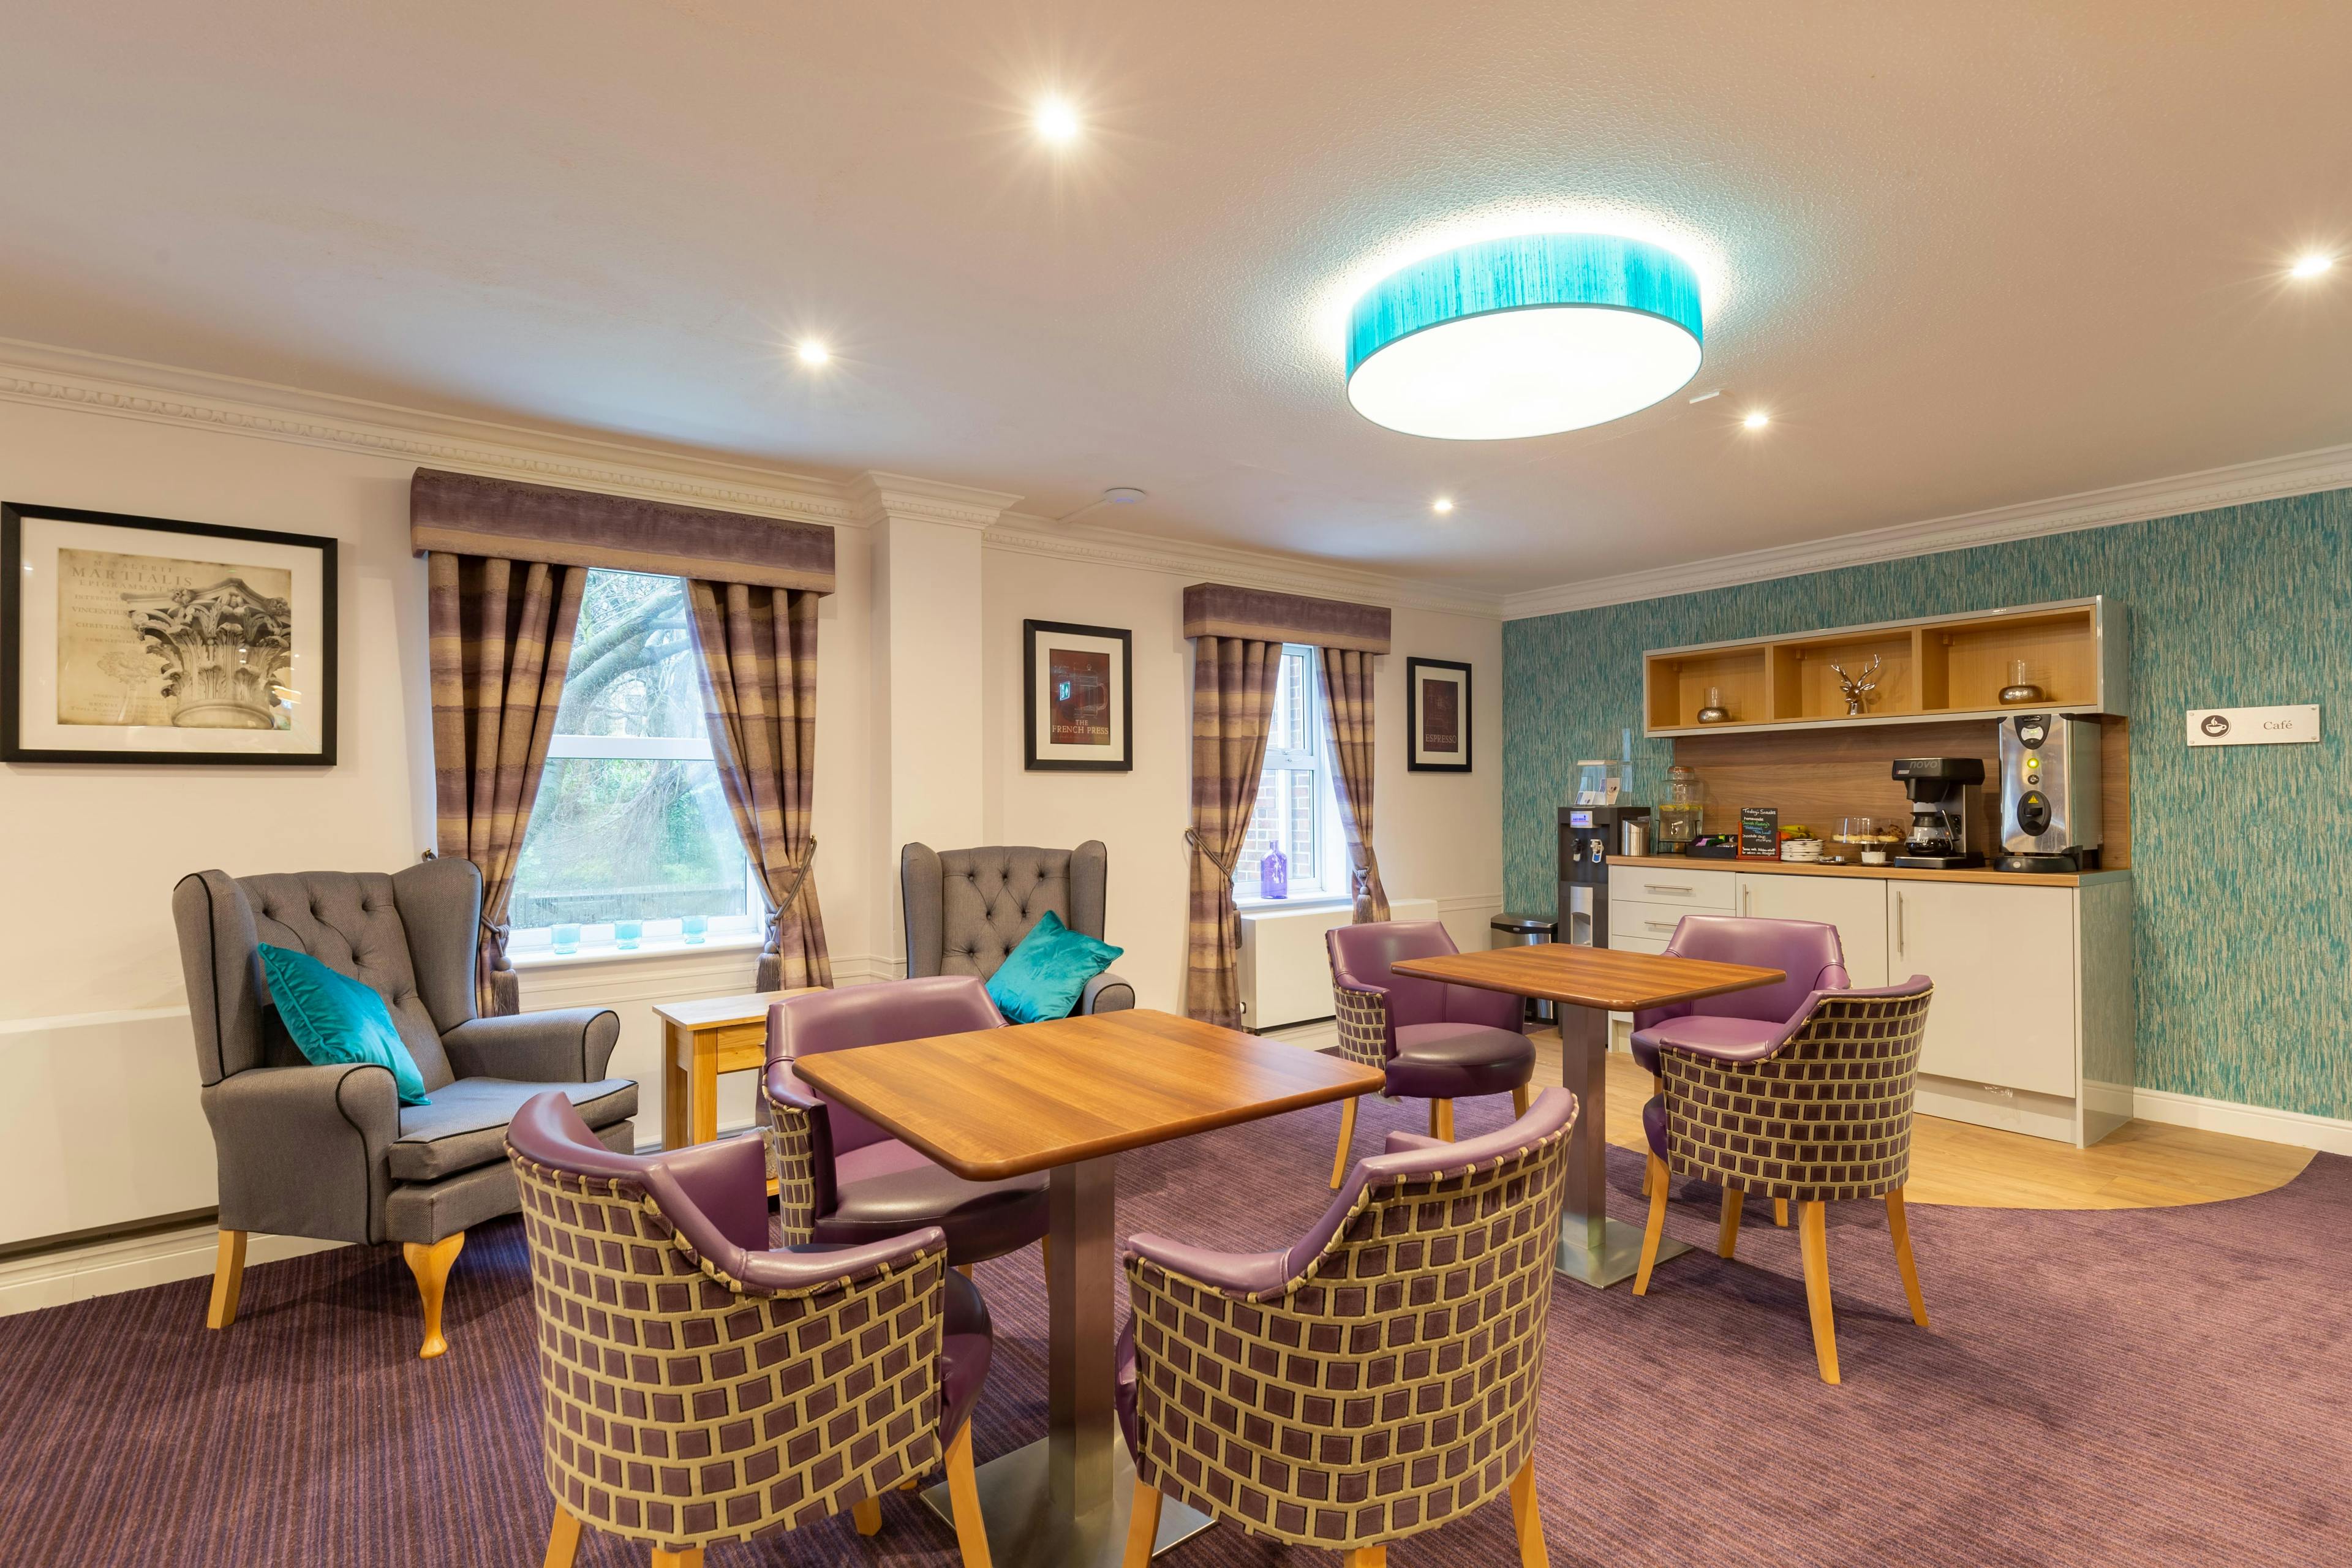 Cafe at South Chowdene Care Home in Gateshead, Tyne and Wear